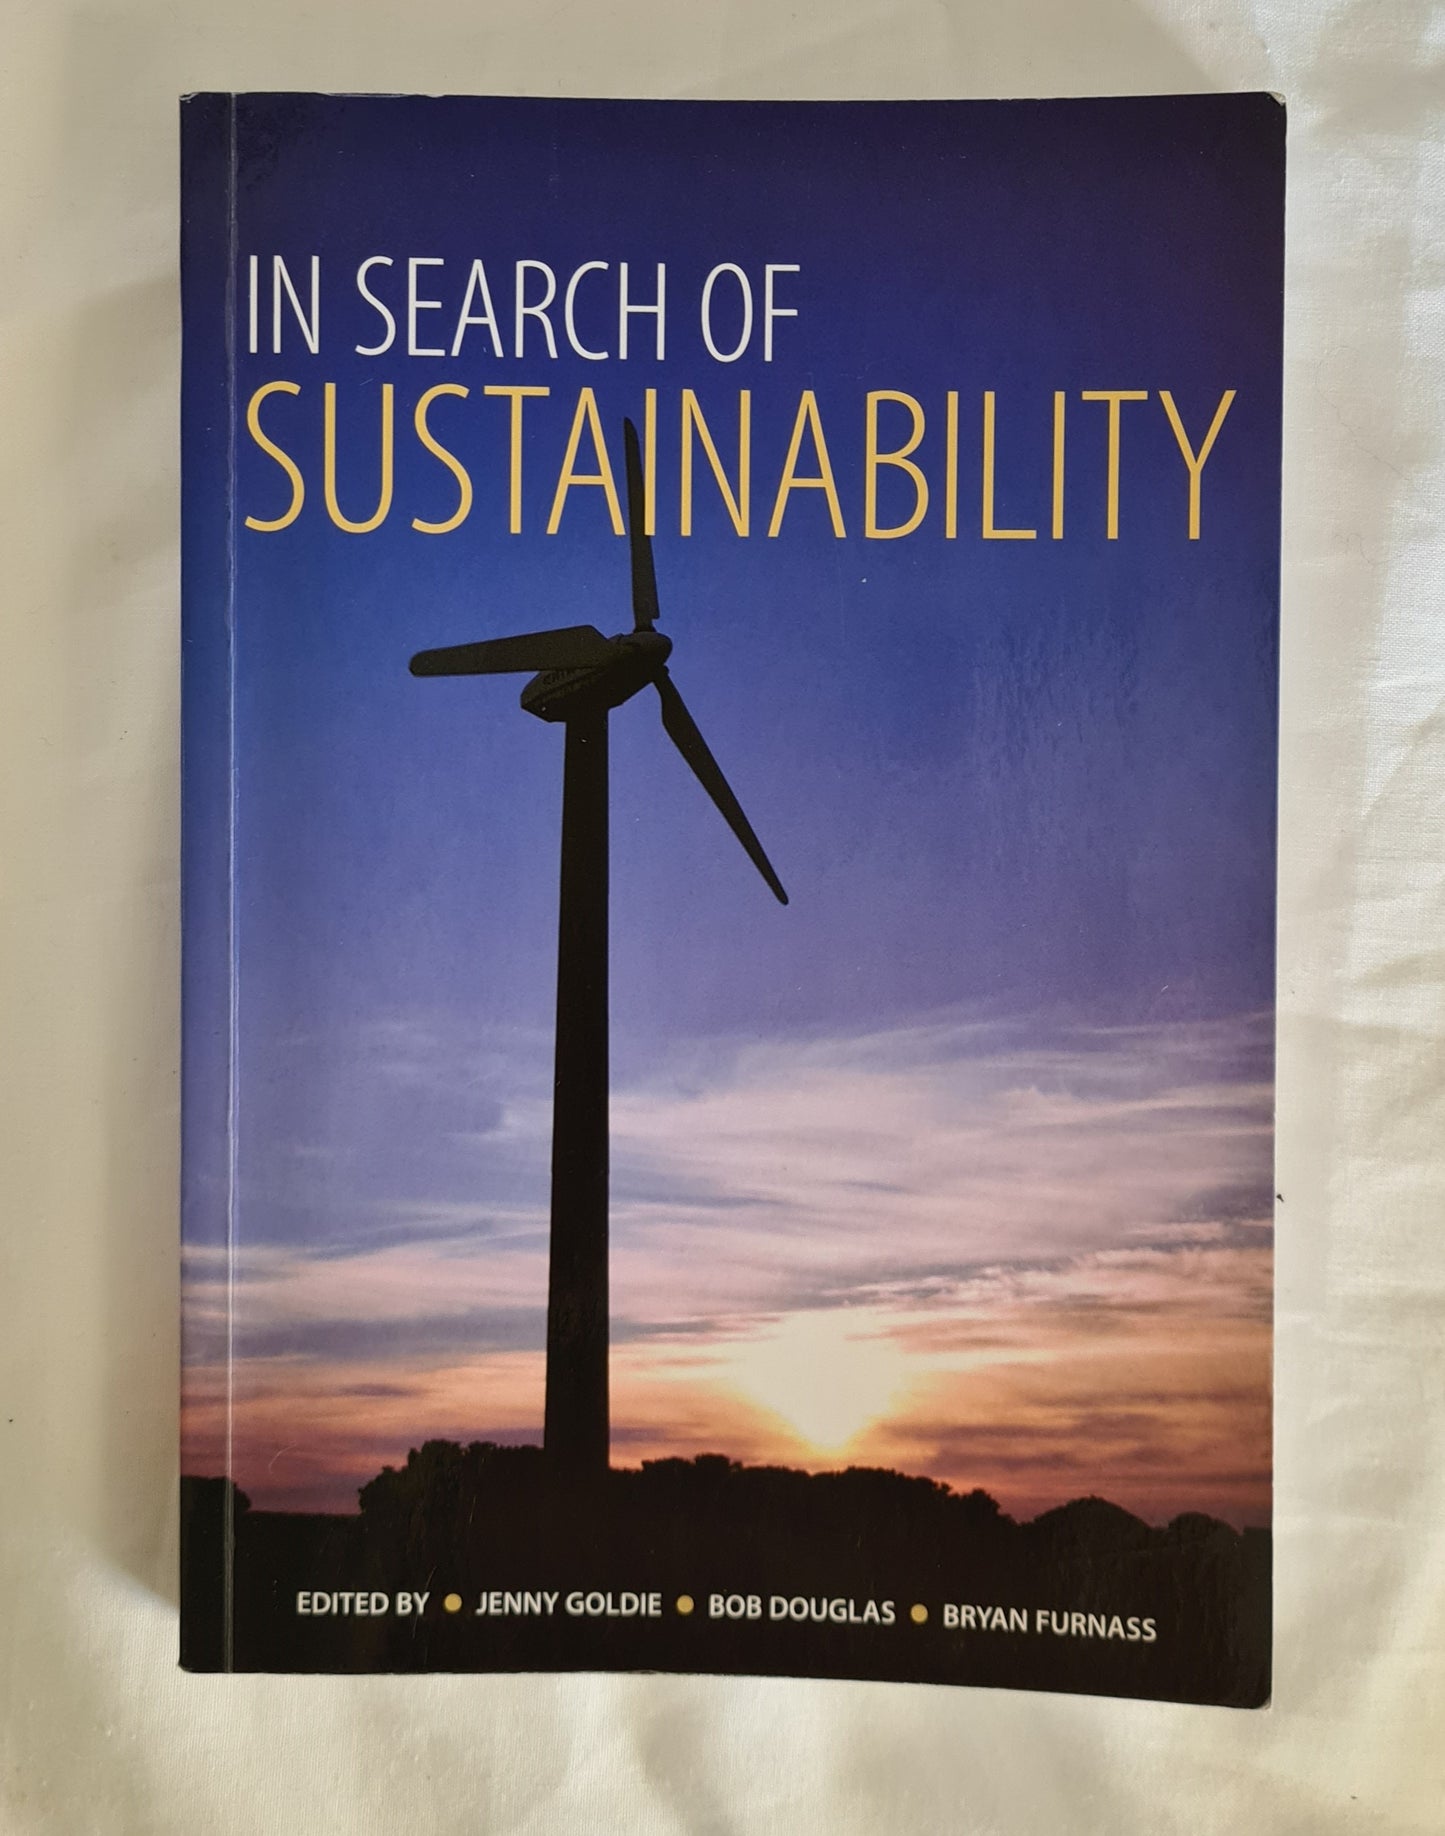 In Search of Sustainability  Edited by Jenny Goldie, Bob Douglas, Bryan Furnass